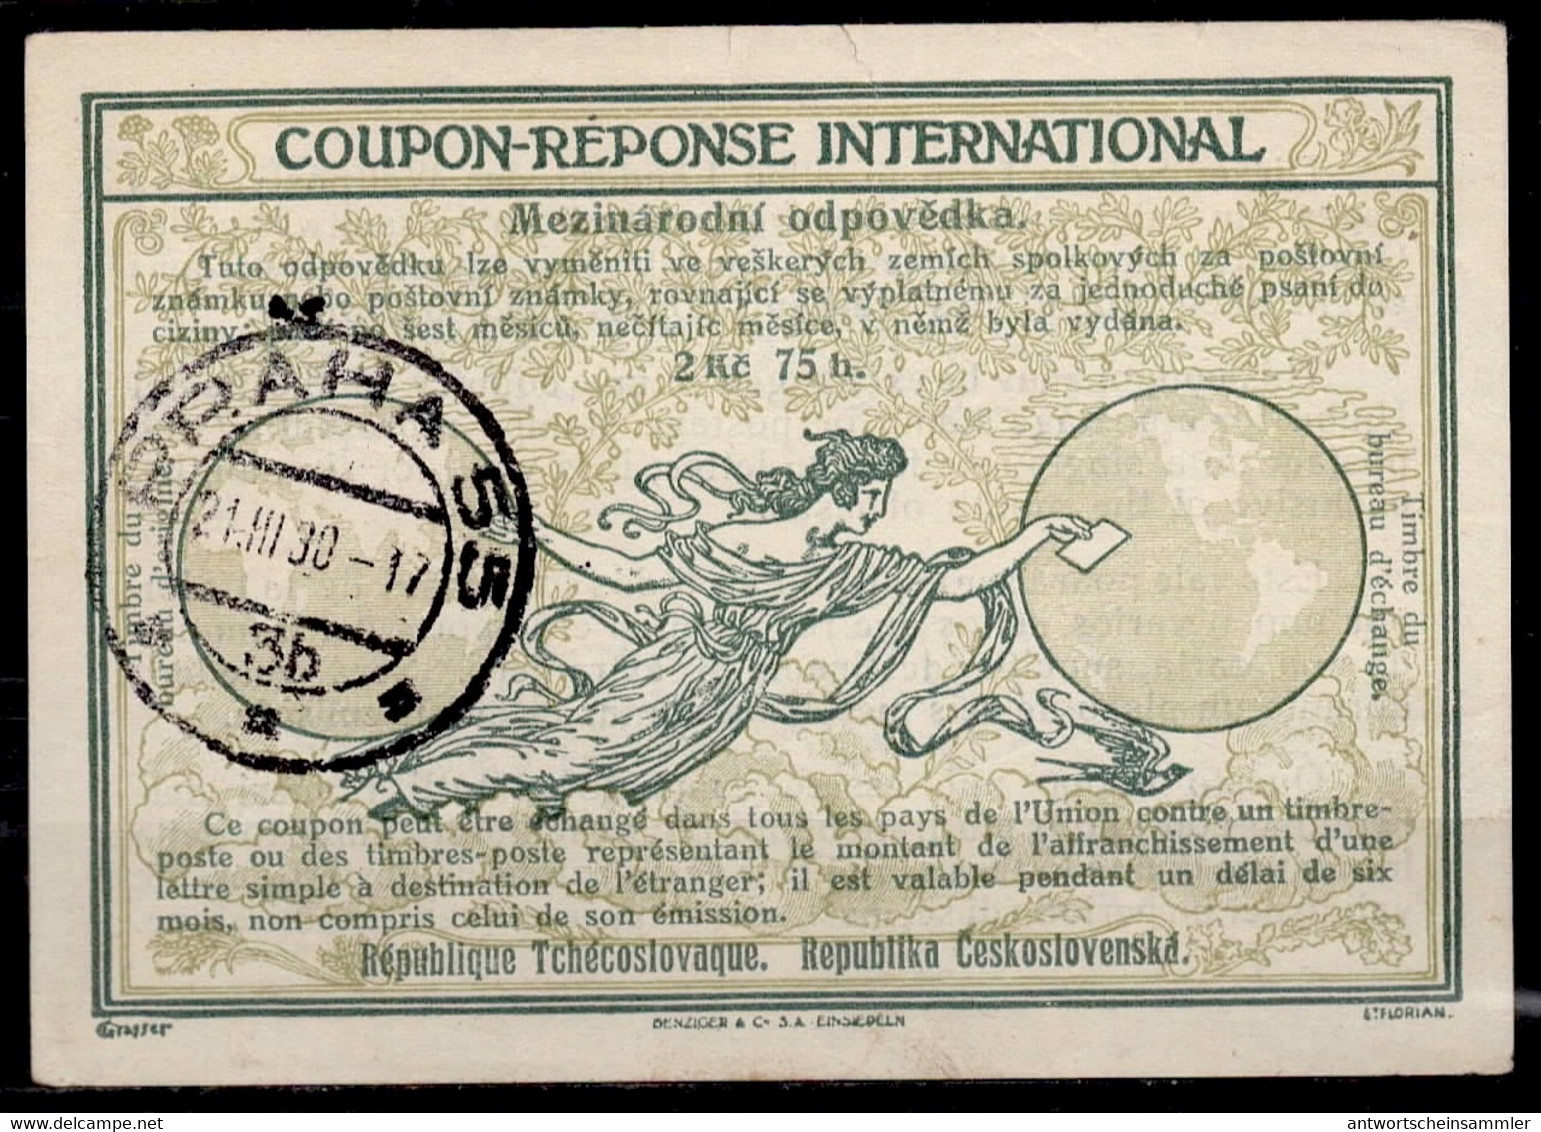 TCHÉCOSLOVAQUIE CZECHOSLOVAKIA  Ro8  2Kc 75h.  Early Int. Reply Coupon Reponse Antwortschein IAS IRC O PRAHA 21.03.30 - Covers & Documents